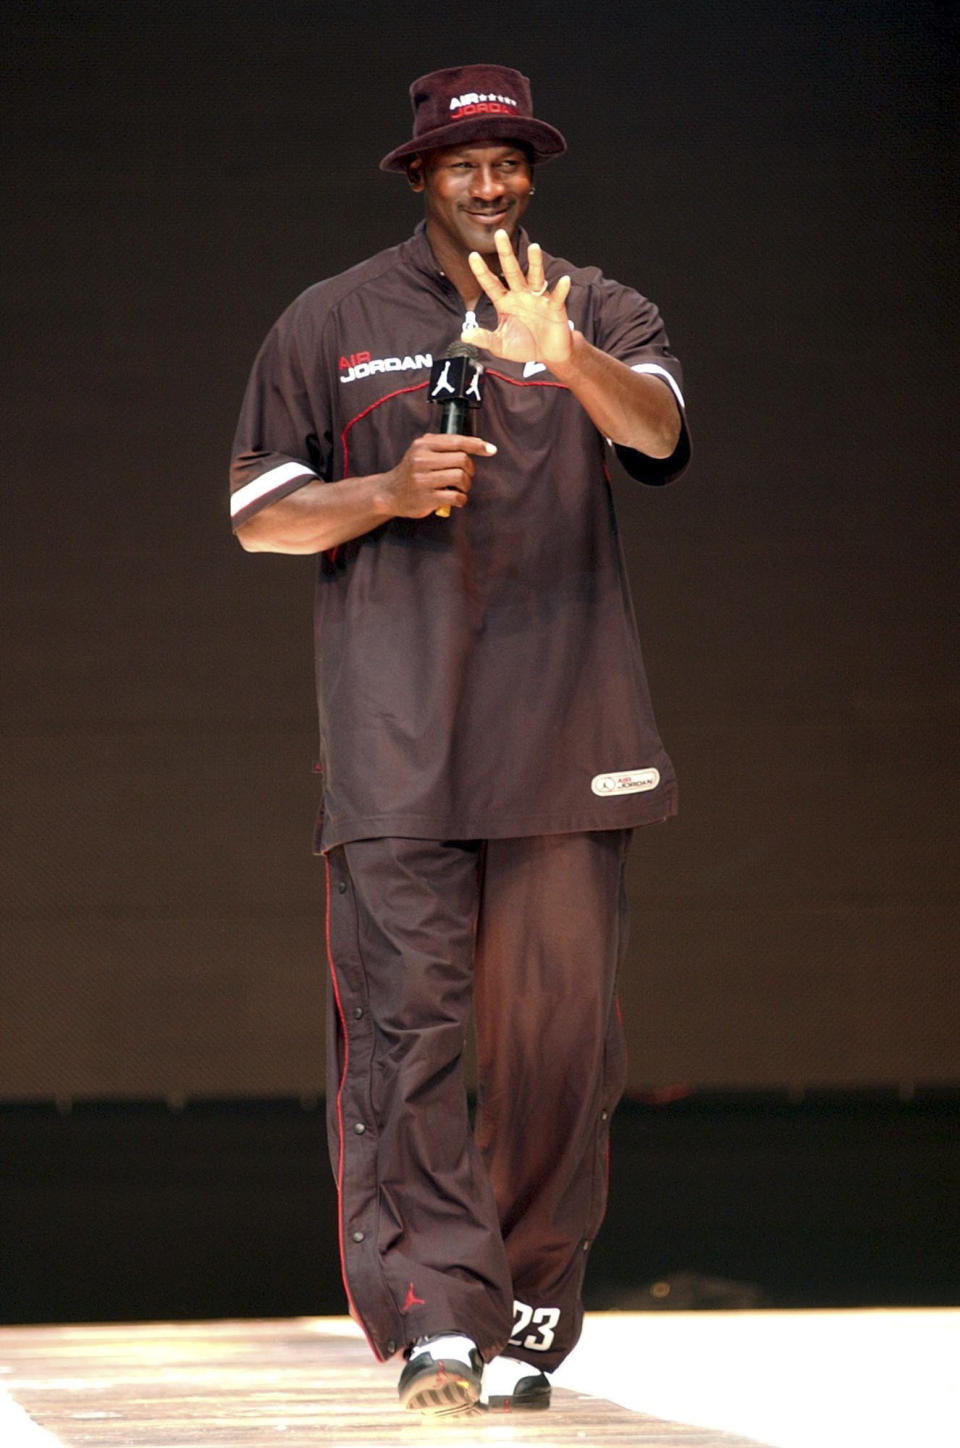 Michael Jordan waves to fans during an event to promote his brand-name sportswear, on May 22, 2004, in Taipei, Taiwan. (AP Photo/Jerome Favre)